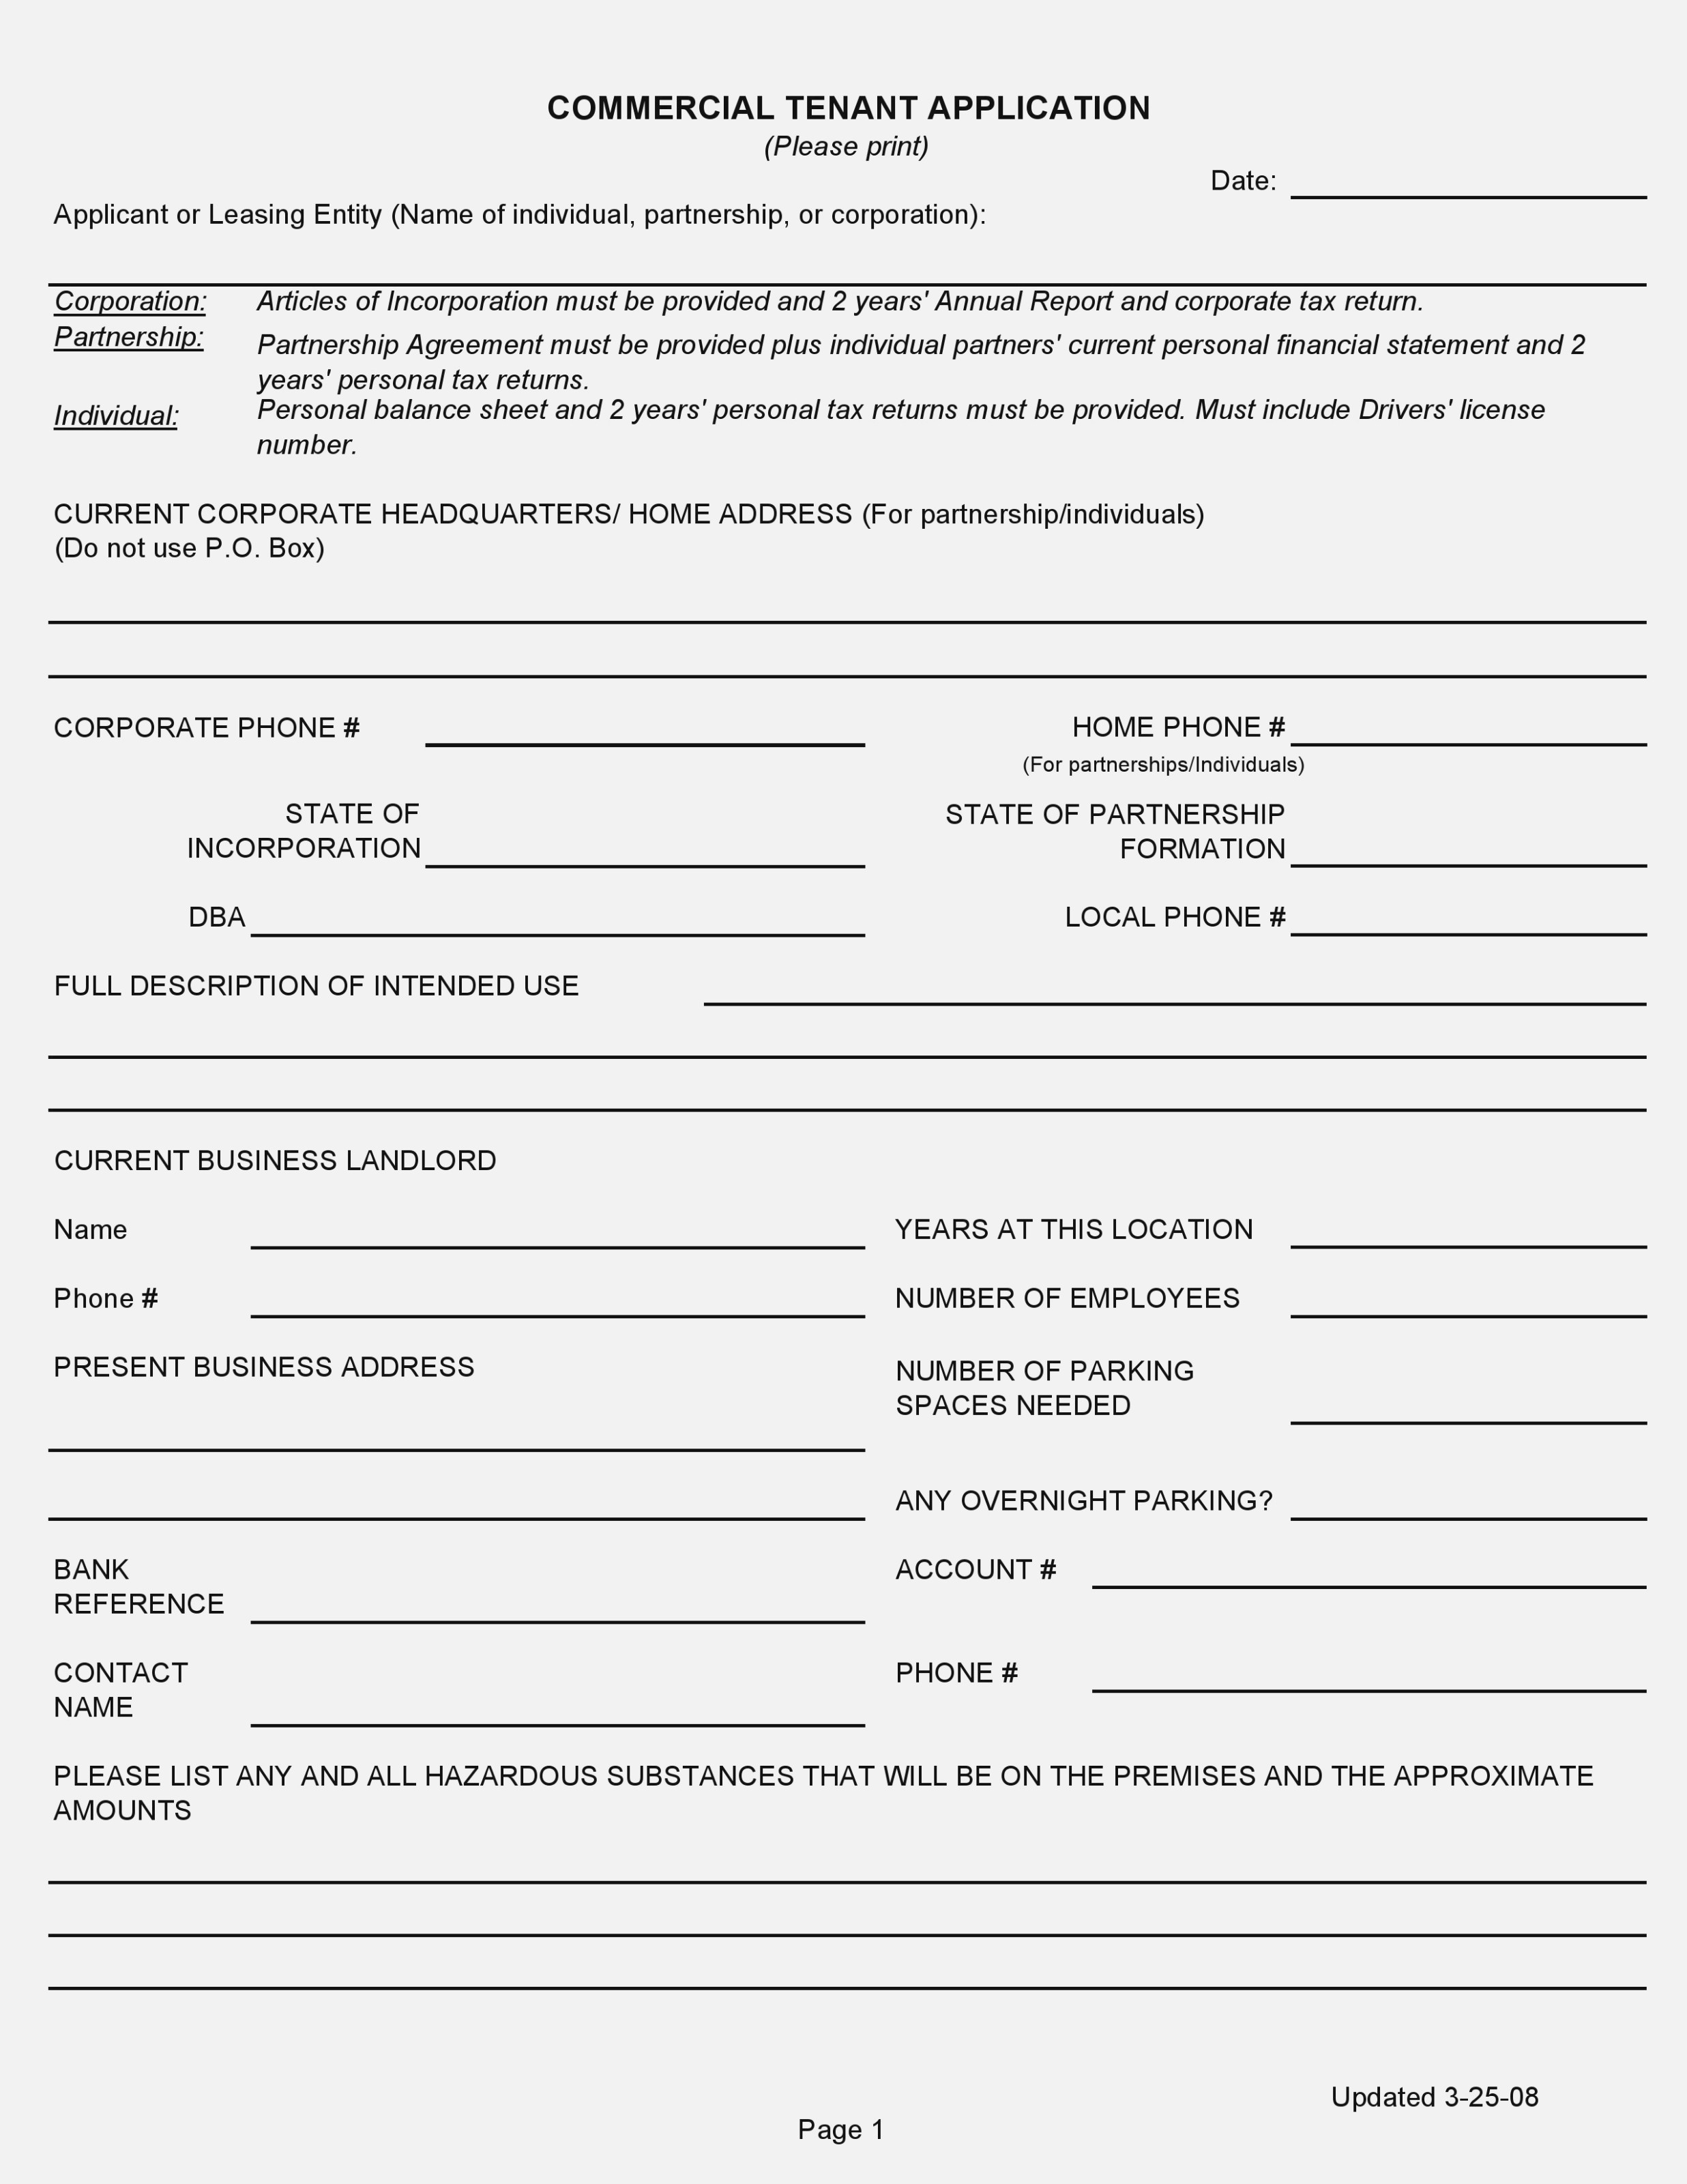 Now Is The Time For You To | Realty Executives Mi : Invoice And - Free Printable Real Estate Forms